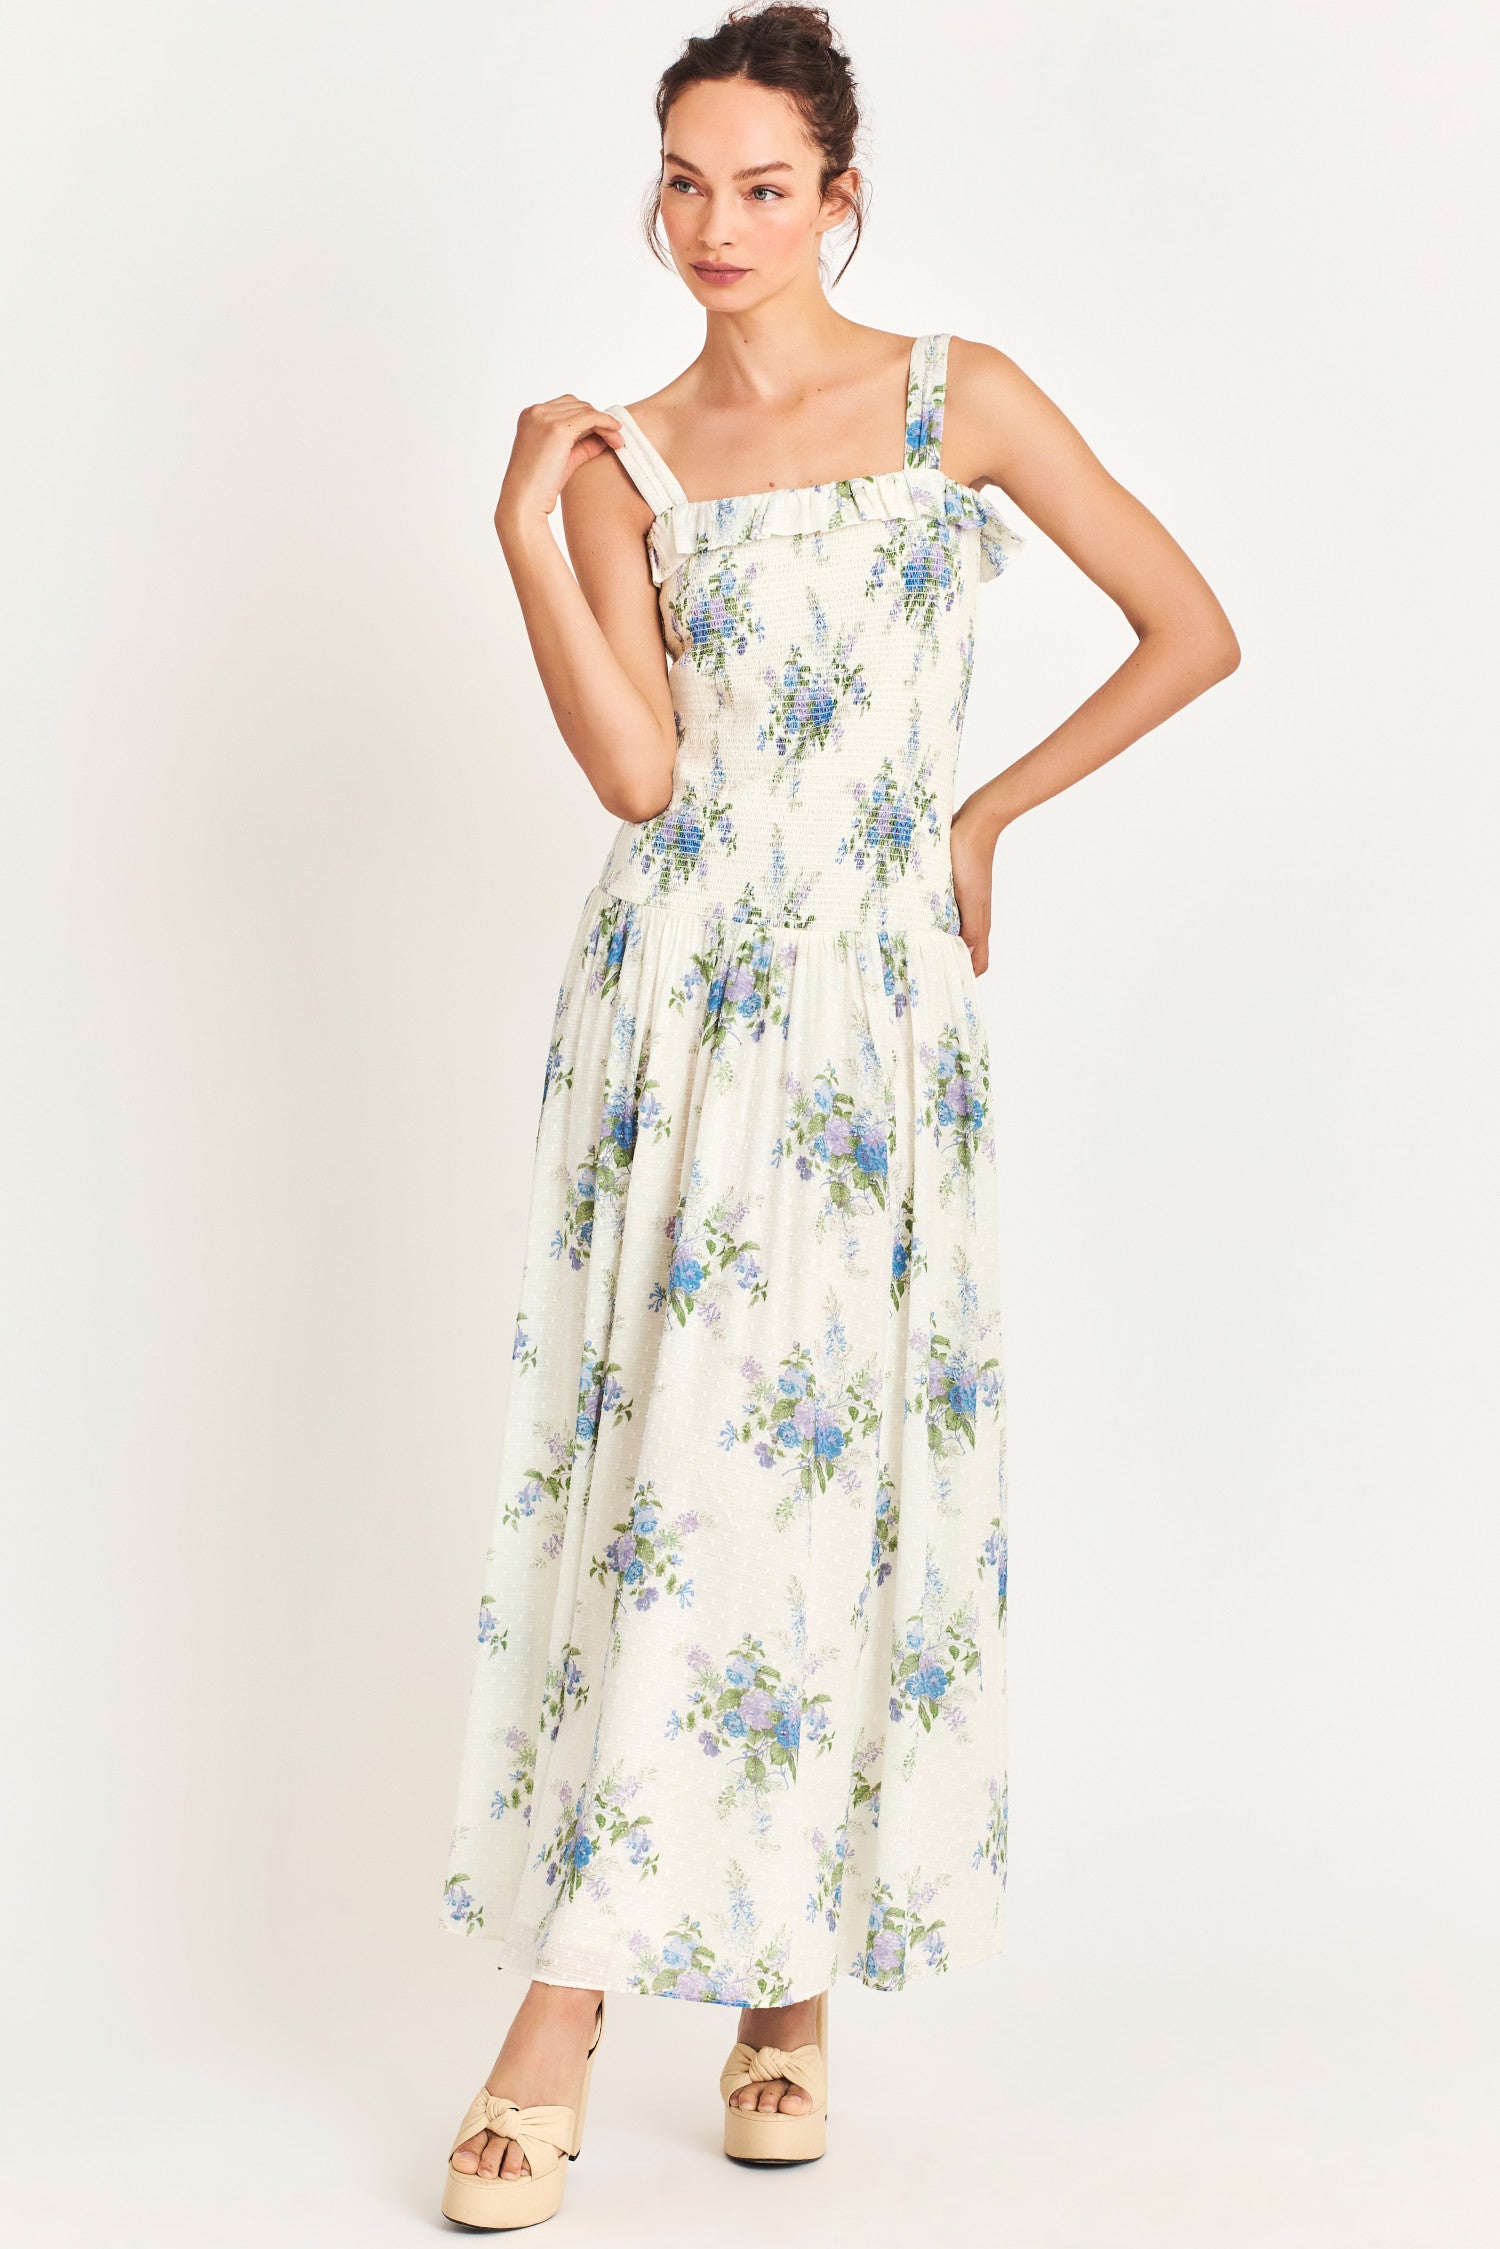 White Maxi dress with a blue heirloom bouquet print on a soft textured dot cotton fabric and a smocked bodice that releases into a sweeping A-line skirt. 